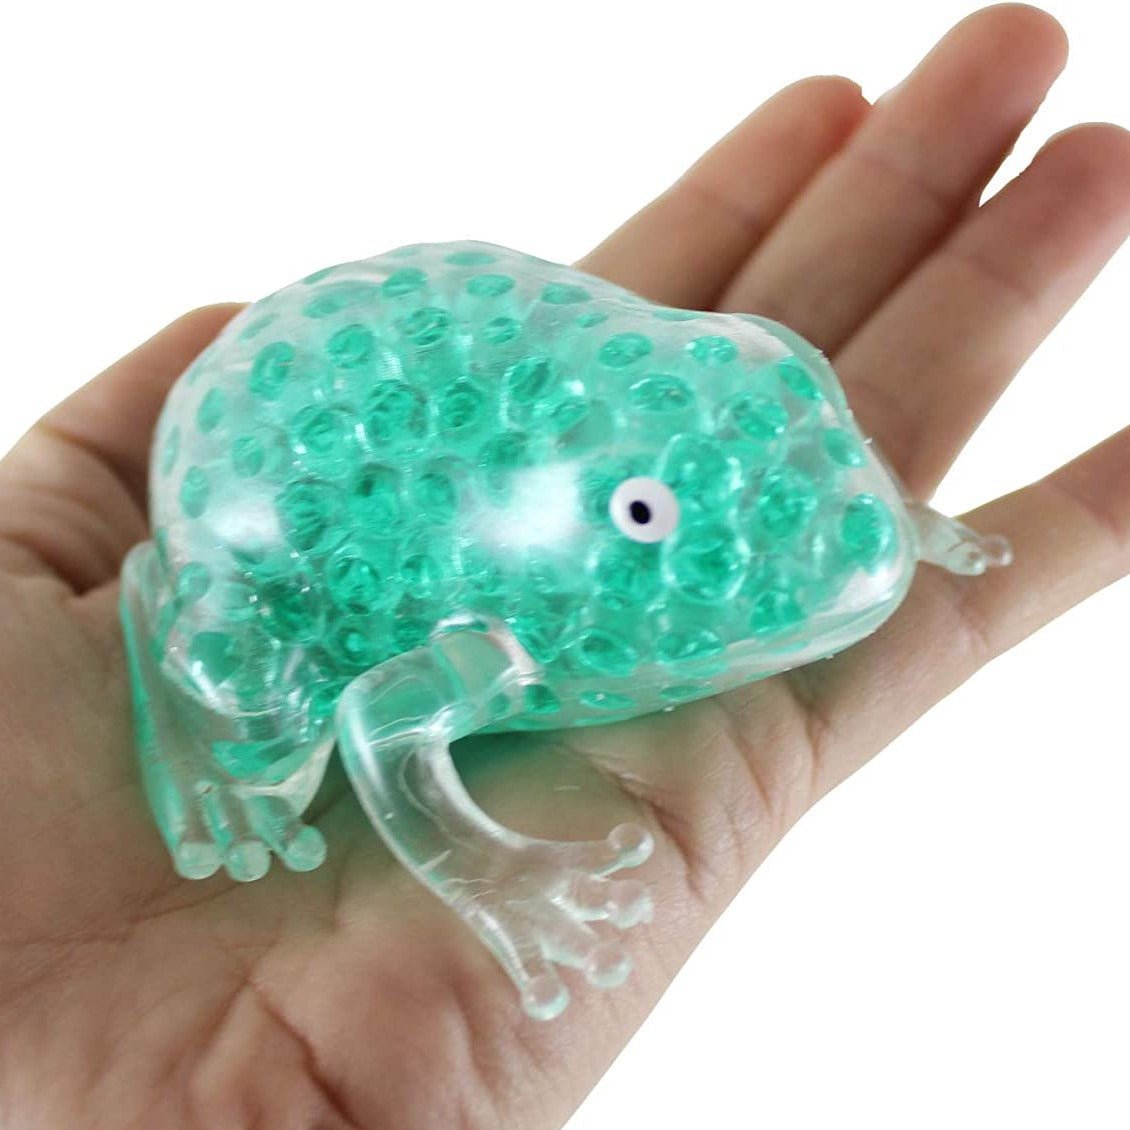 Squeezy Frog, Squeezy Frogs are perfect for kids who need a tactile outlet for their restlessness or stress. Just give the frog a squeeze and watch as the beads push out and around, making the ball bulge. It's a fun and satisfying way to release tension and stress. The Squeezy Frog is made of a flexible skin filled with thick gel balls, which makes it soft, pliable, and fun to manipulate with the hands. The skin is slightly sticky to the touch, providing a great sensory experience for kids. Squeezy Frogs ar